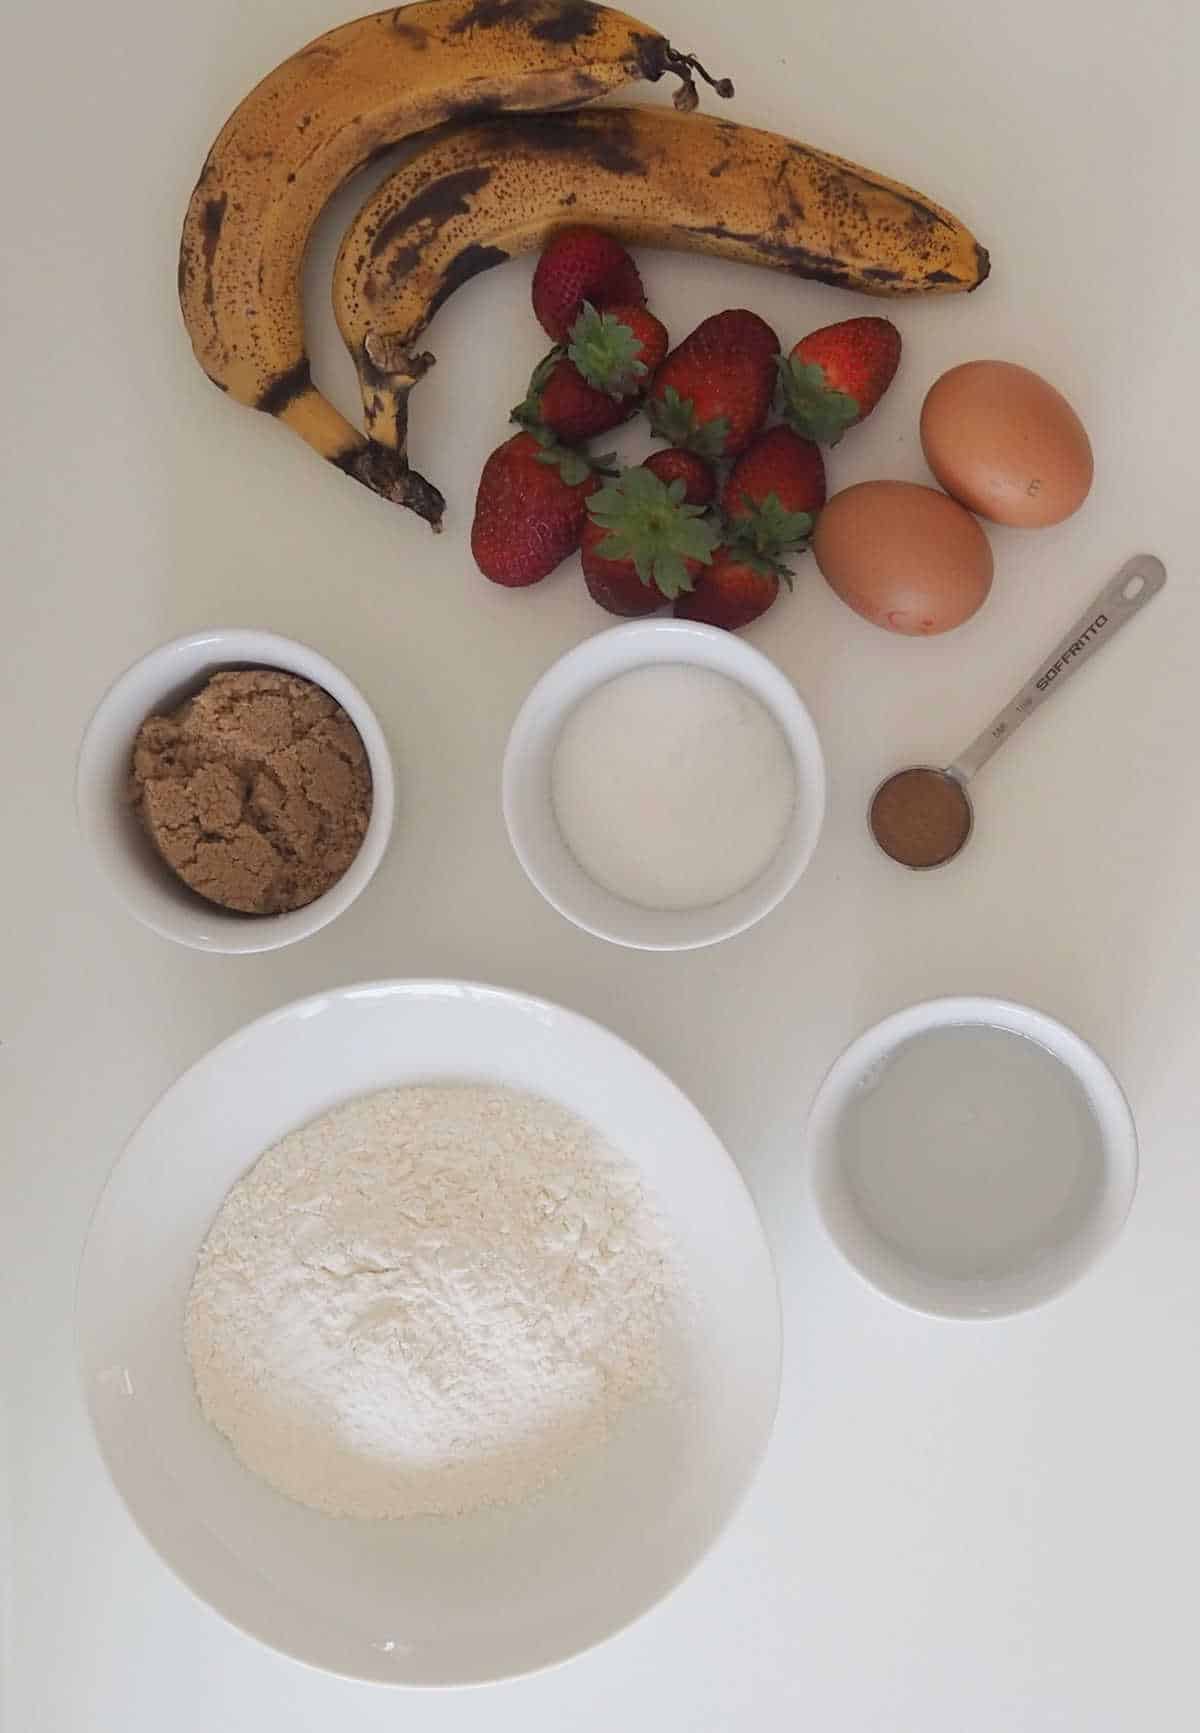 Ingredients to make Strawberry and Banana Loaf in a Thermomix.